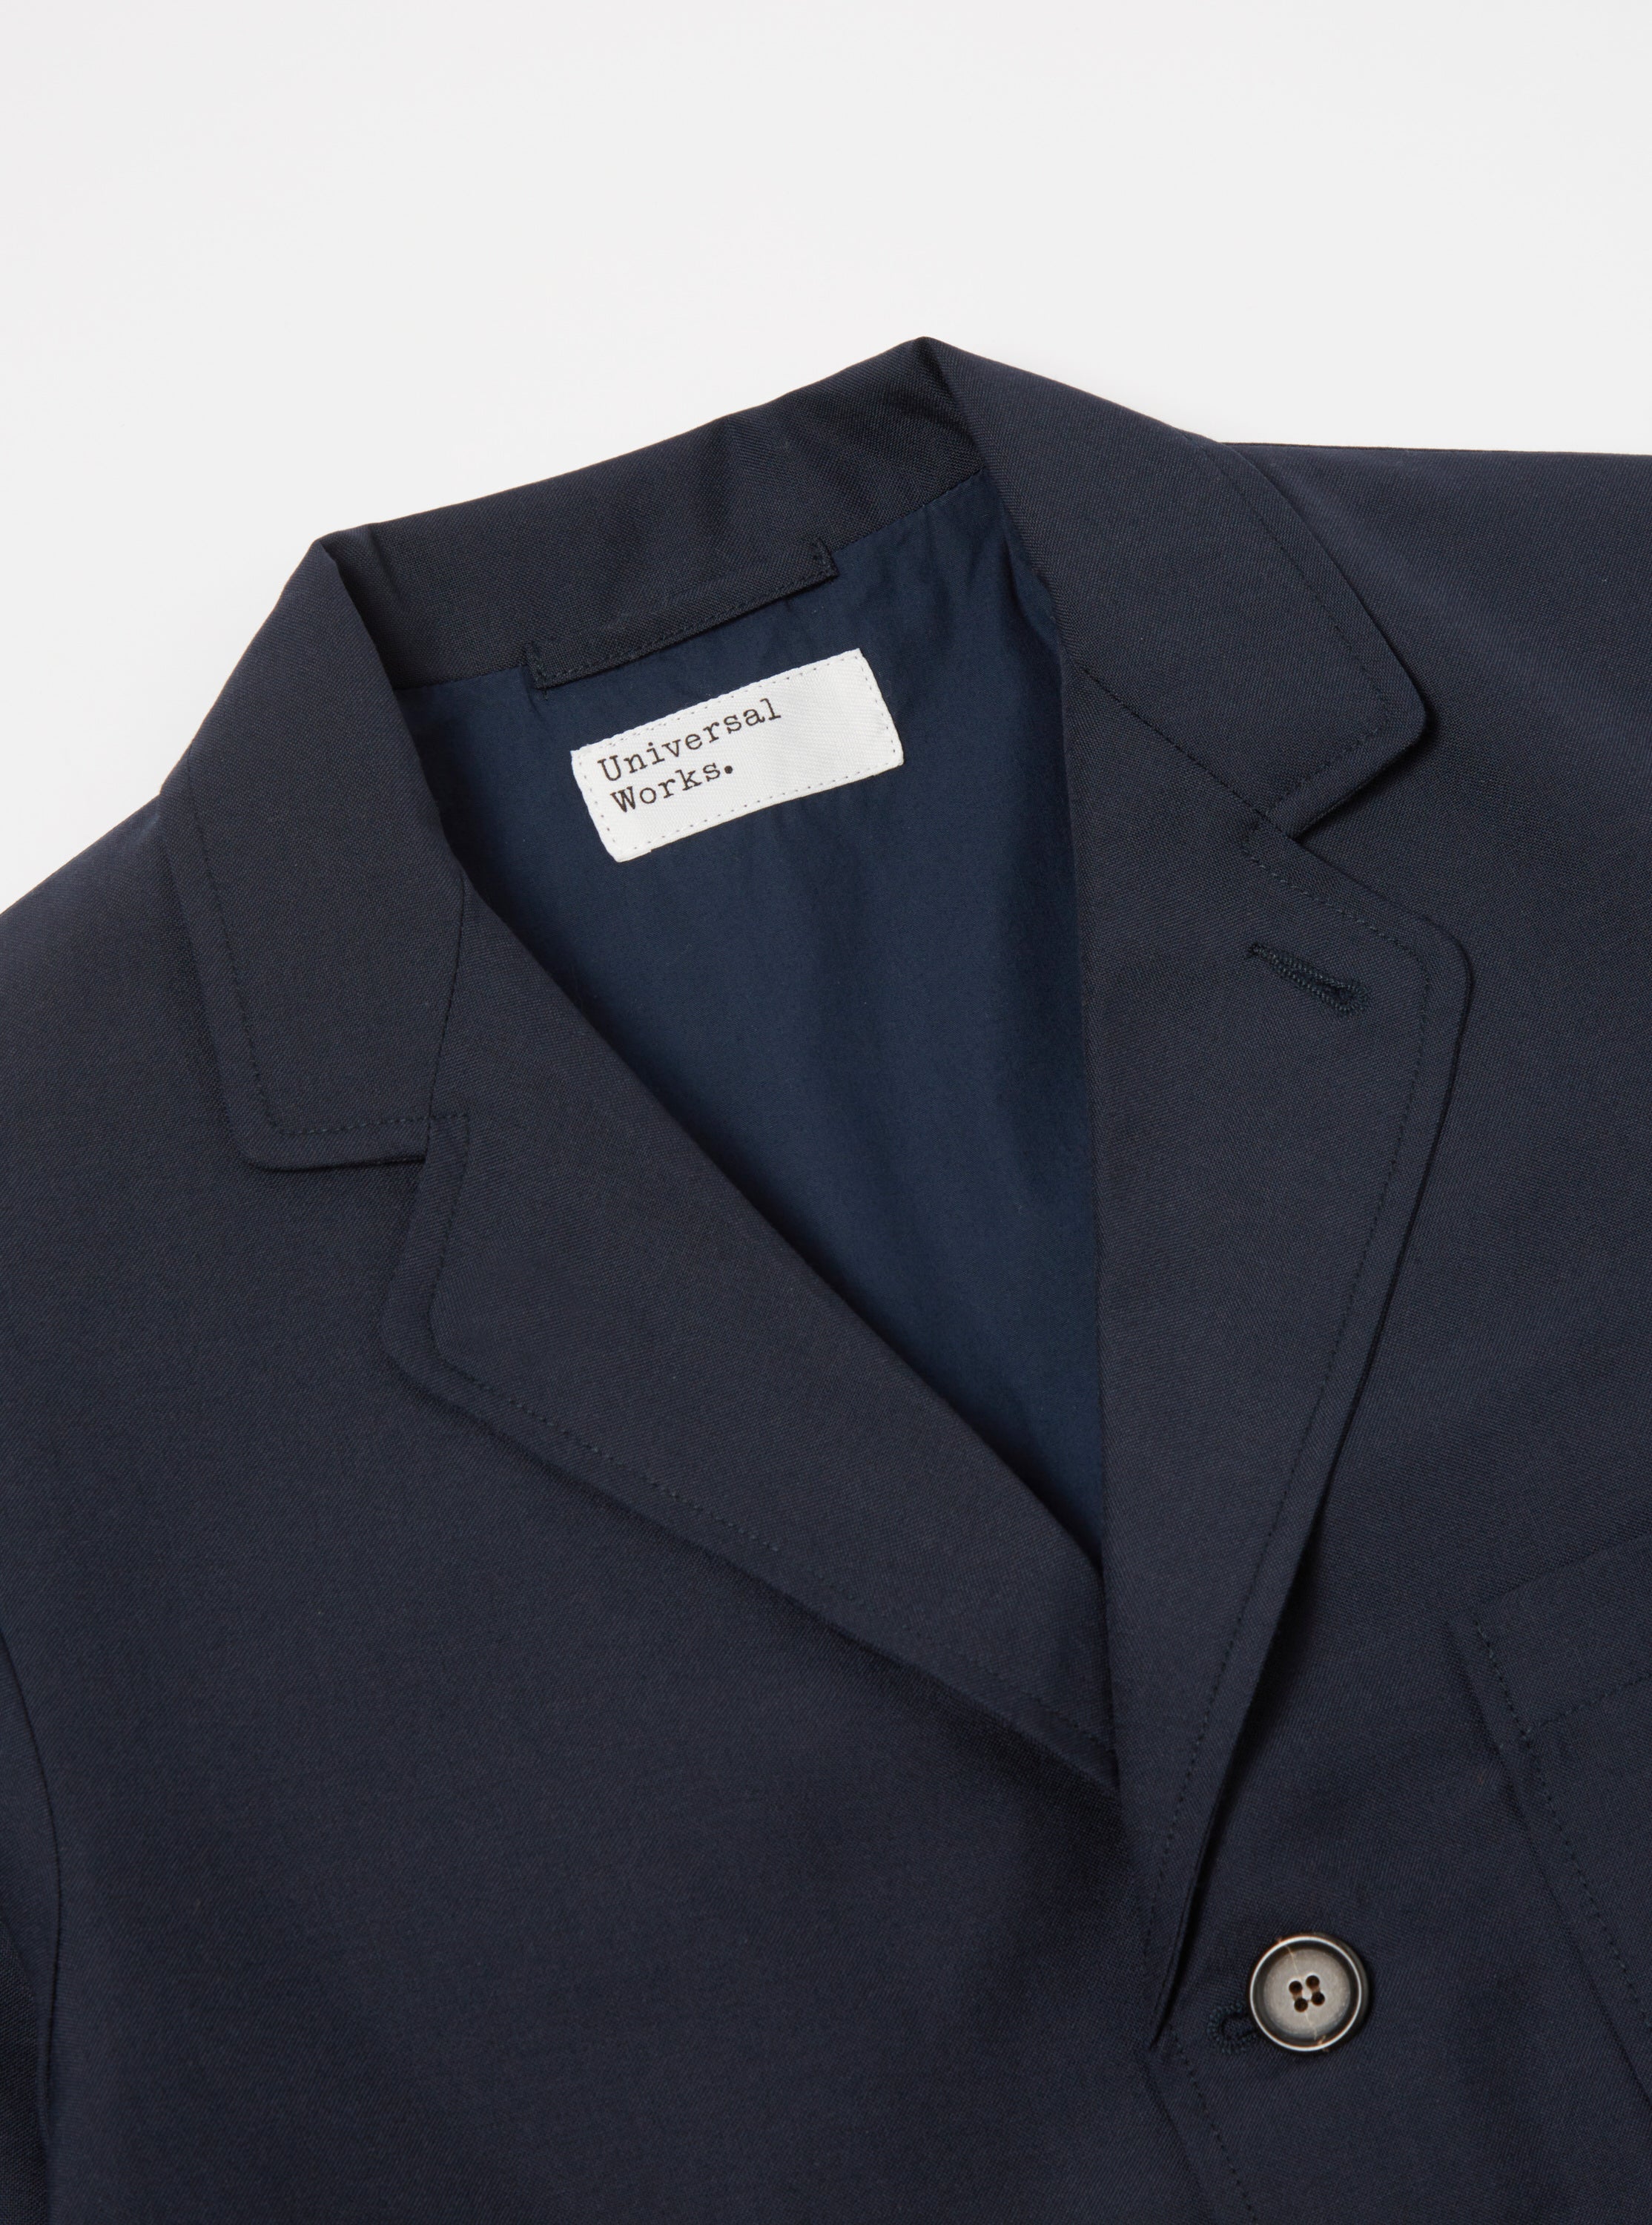 Universal Works Three Button Jacket in Navy Tropical Suiting